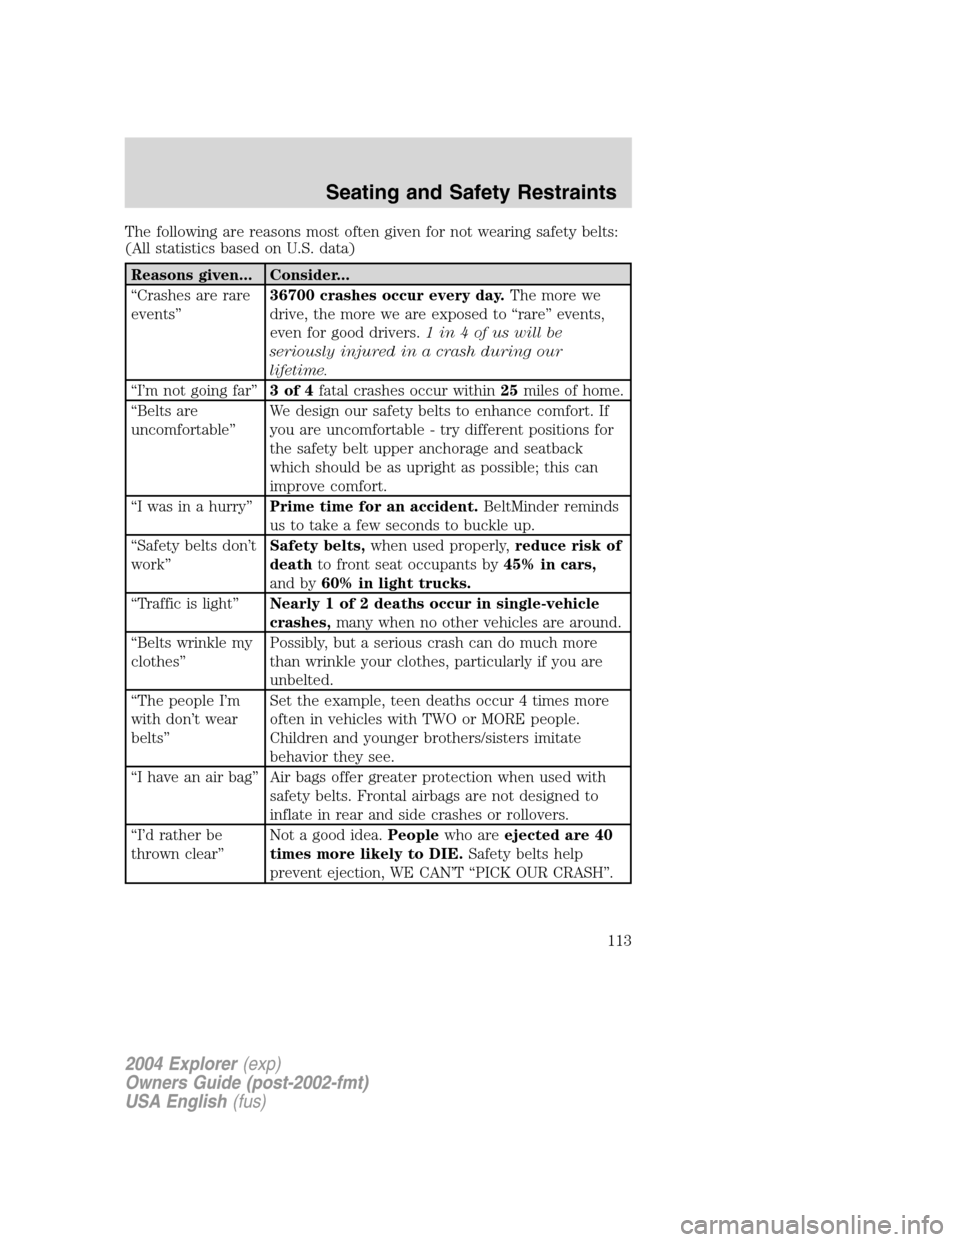 FORD EXPLORER 2004 3.G Owners Manual The following are reasons most often given for not wearing safety belts:
(All statistics based on U.S. data)
Reasons given... Consider...
“Crashes are rare
events”36700 crashes occur every day.The